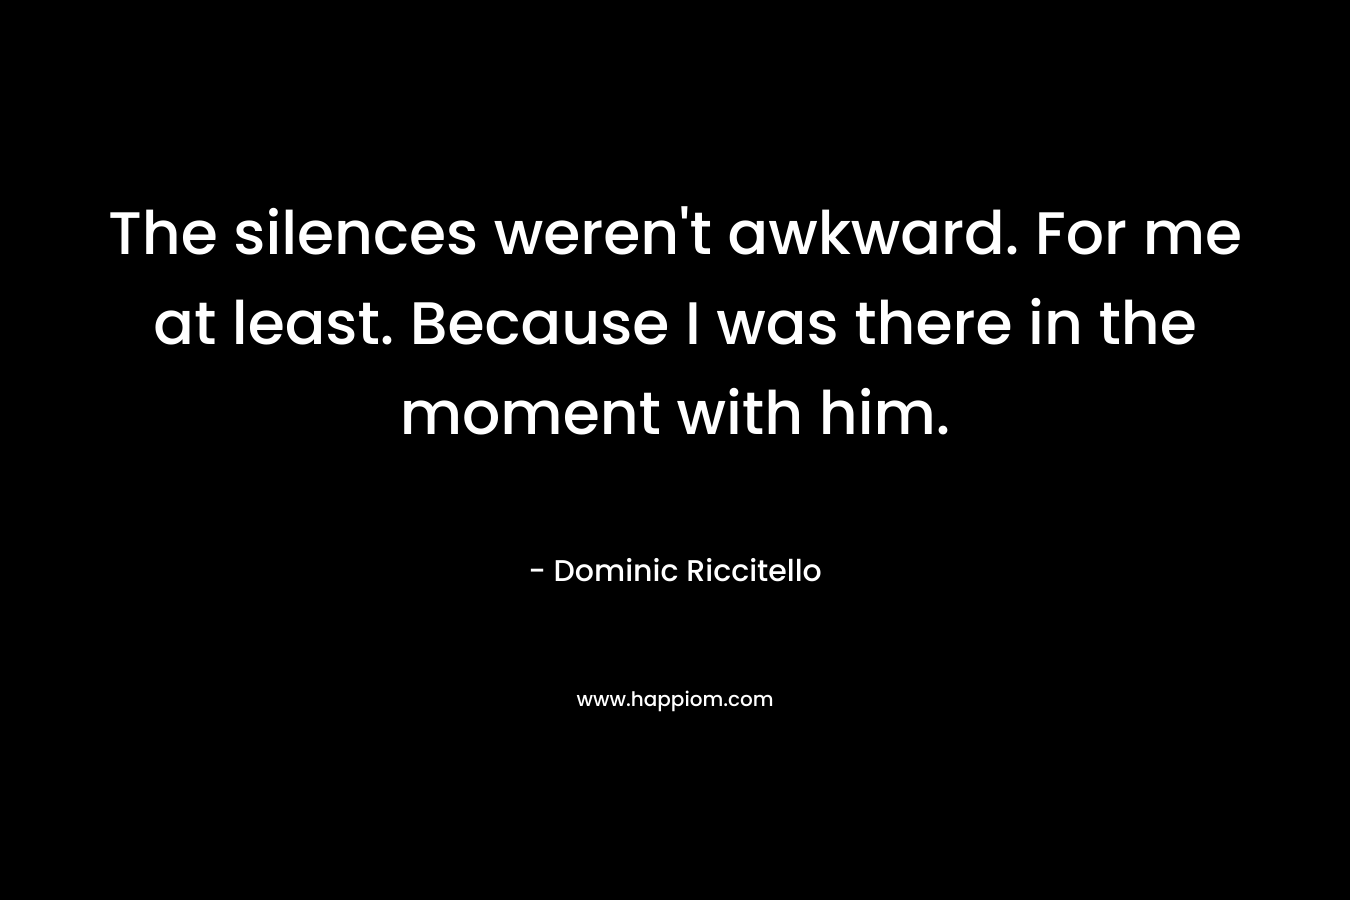 The silences weren't awkward. For me at least. Because I was there in the moment with him.